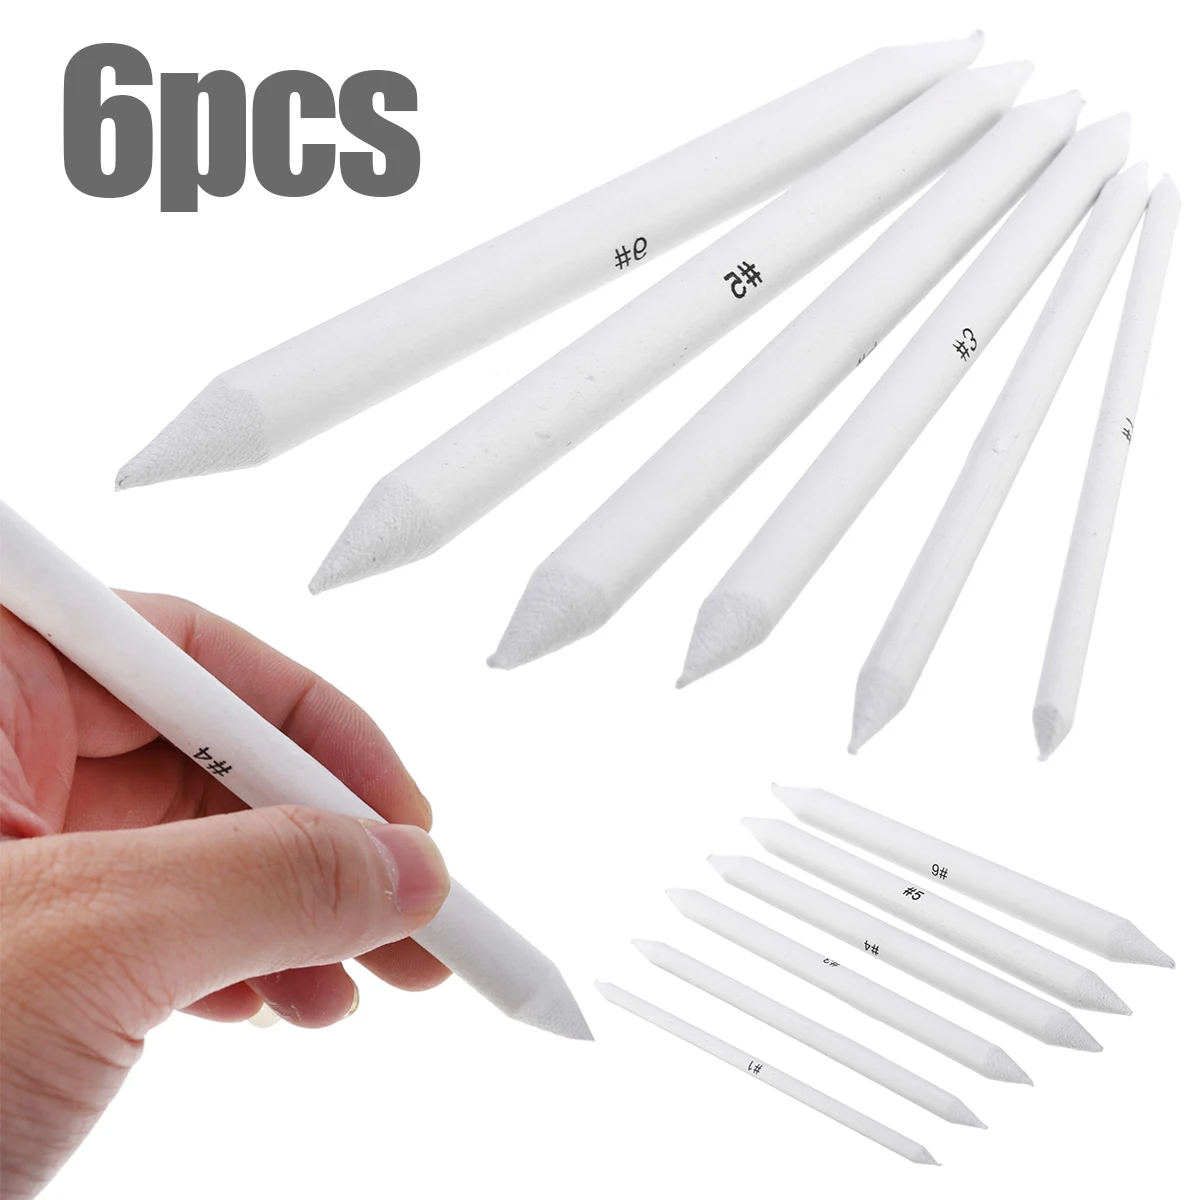 6 Sizes Rice Paper Sketch Art Tortillon White Drawing Pen Blending Smudge Stump Stick Practical Painting Tool for School Office